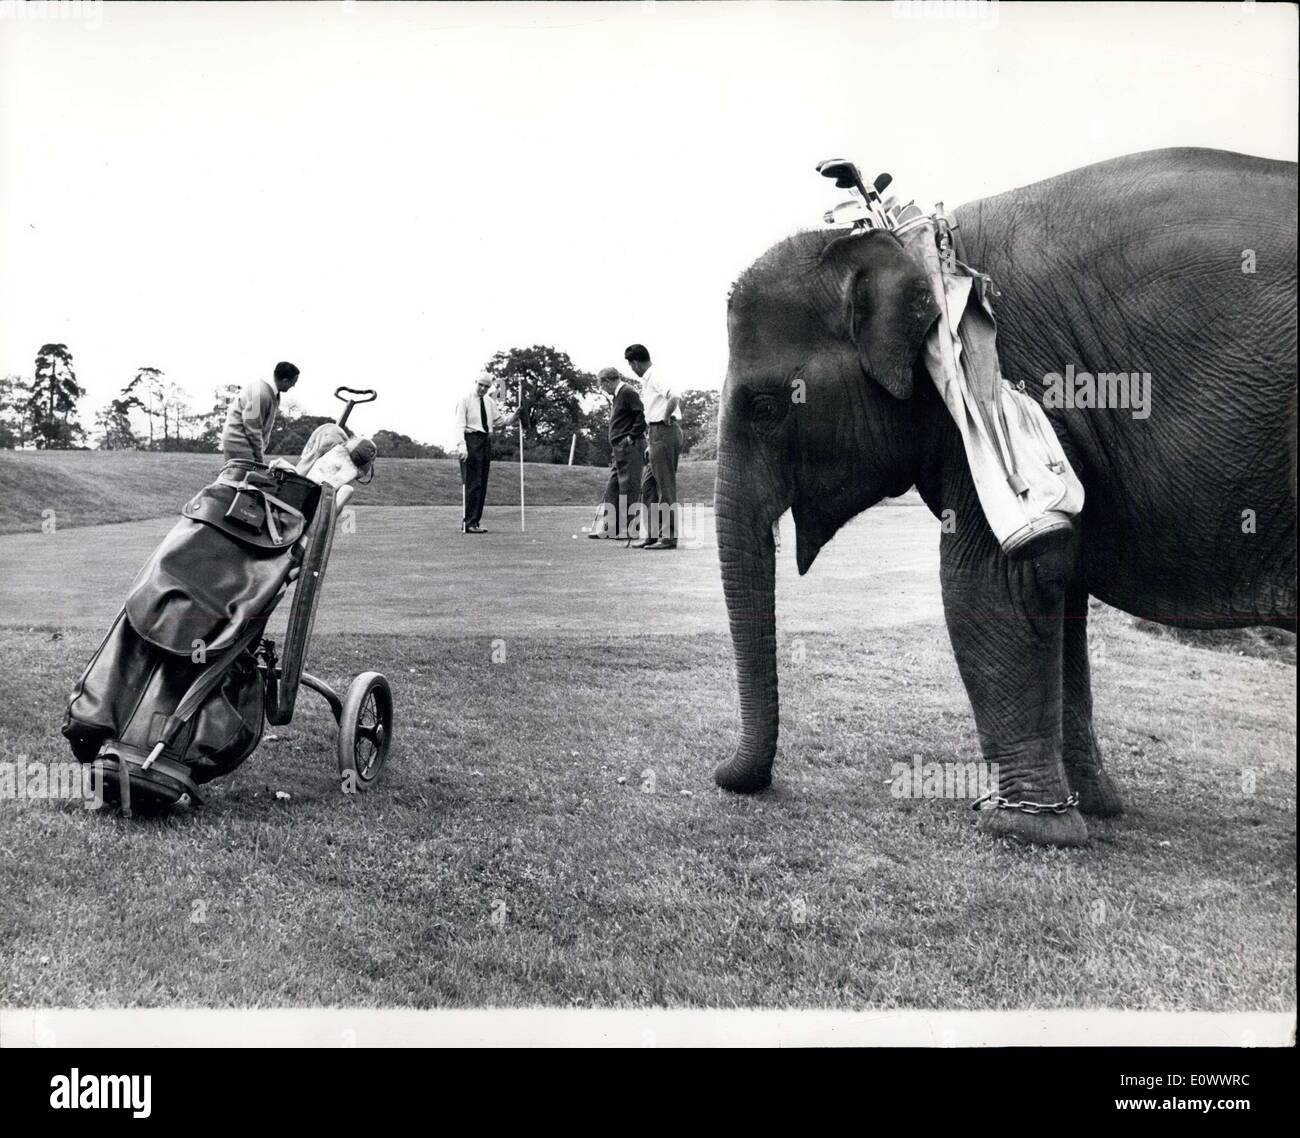 May 14, 1964 - The Caddy That Never Forgets. Owing to a shortage of ''caddies'' for a two-day golf tournament organised by the Car mart Company at the Wentworth Golf Club, the help of 4? year old Candy, an Indian elephant from Chessington Zoo to carry clubs for competitors was enlisted. Candy didn't take long to cotton on to the idea, and was soon cheerfully striding round the course with the golfers, thoroughly enjoying his day out. Photo Shows: Candy takes a breather while the golfers are putting on the green. Stock Photo